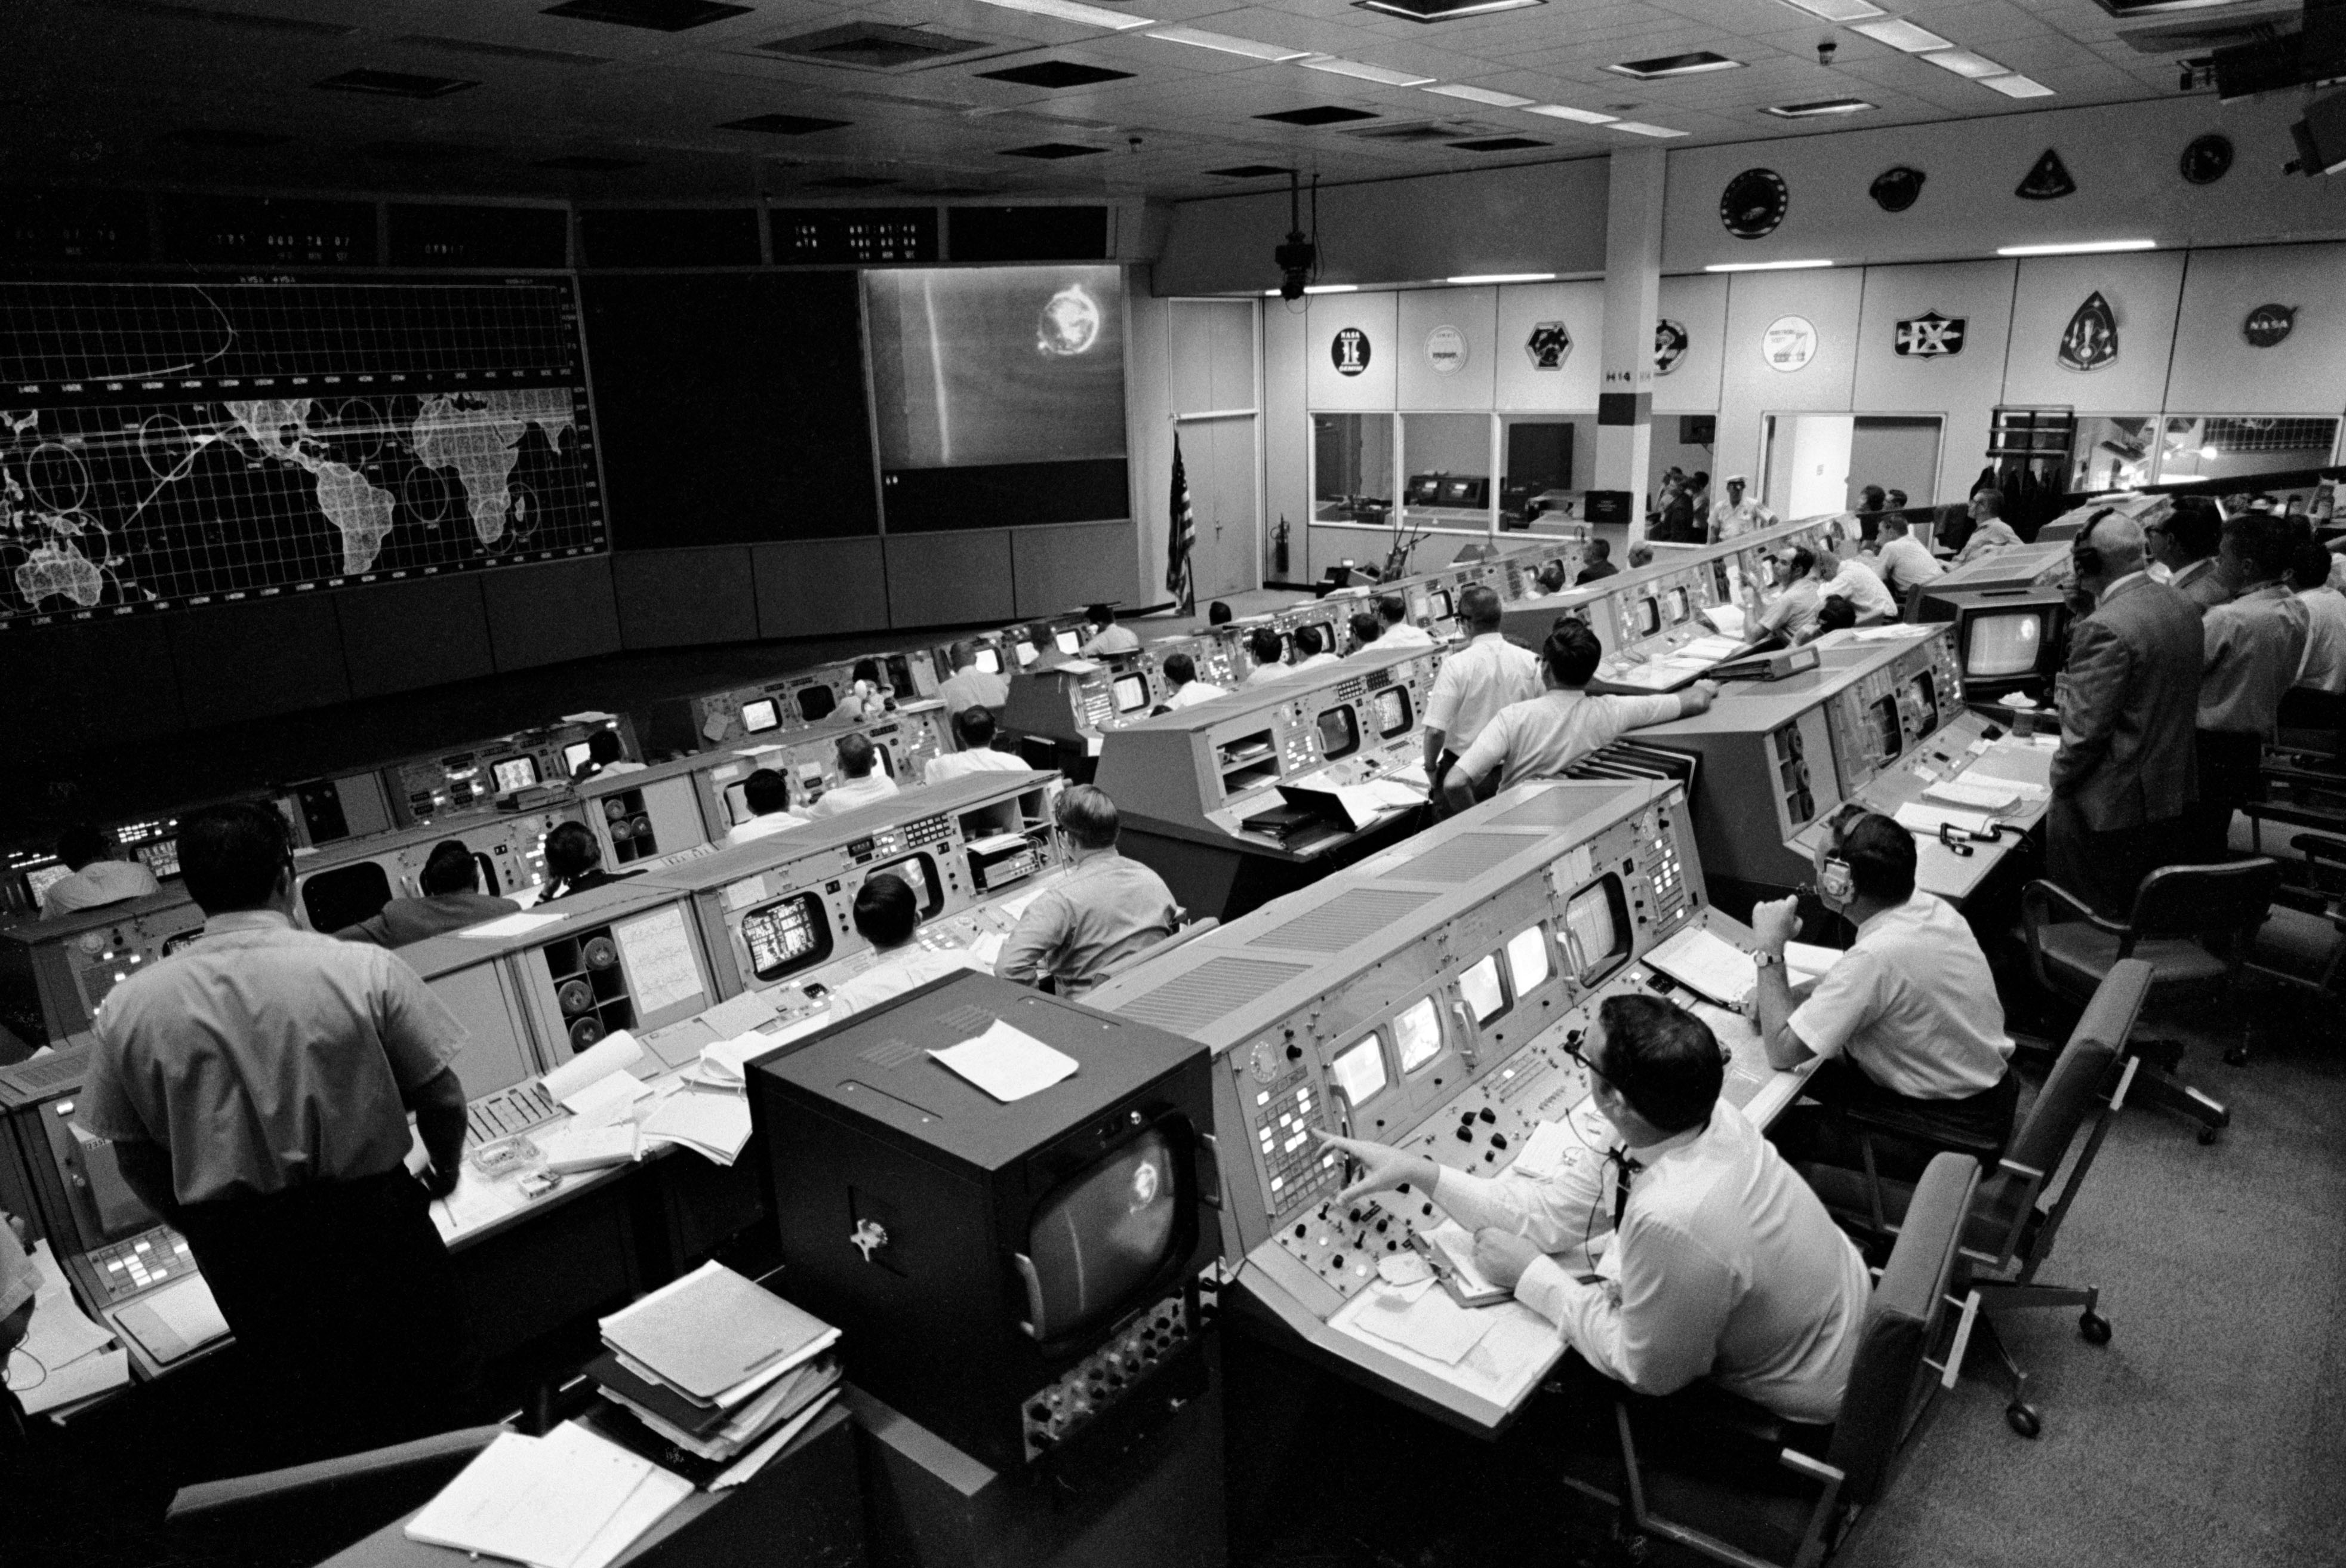 Black and white photo of NASA mission control room with people sitting at rows of computers